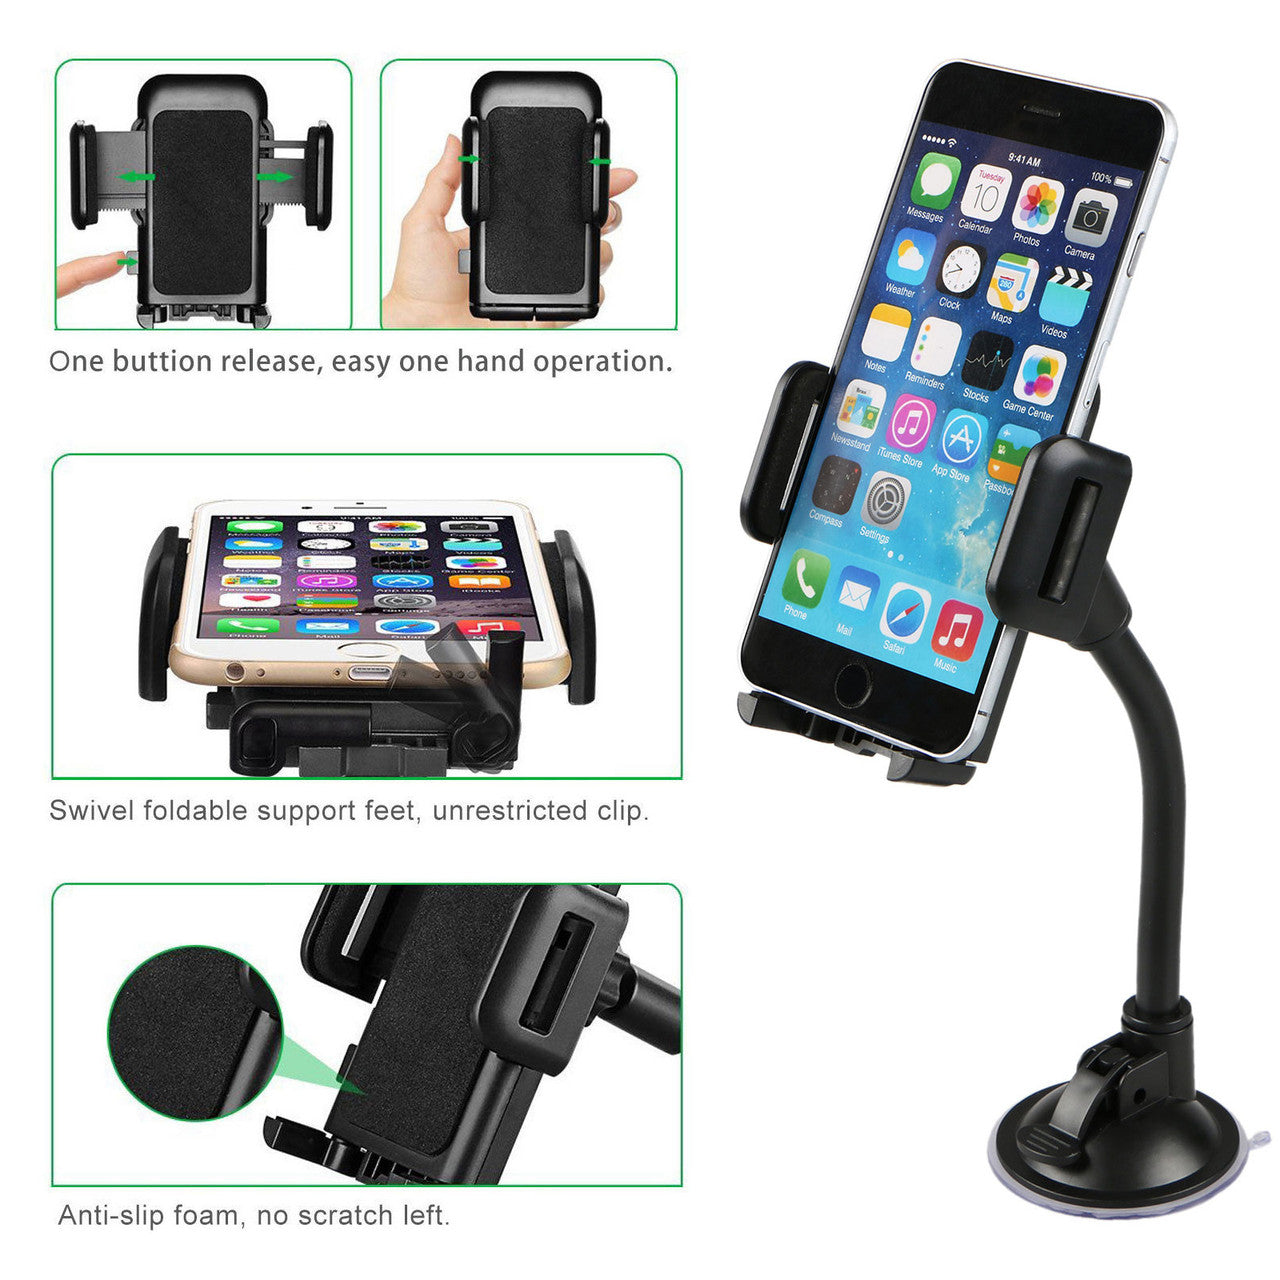 360 Degree Universal Windshield Dashboard Long Arm Car Phone Holder for iPhone XS/XR/X/8/7/6S/6 Plus, Samsung Galaxy S10/S10E/S10 Plus/S9 Plus, LG G7/G6/V40, and All 4-6 inch Smartphones